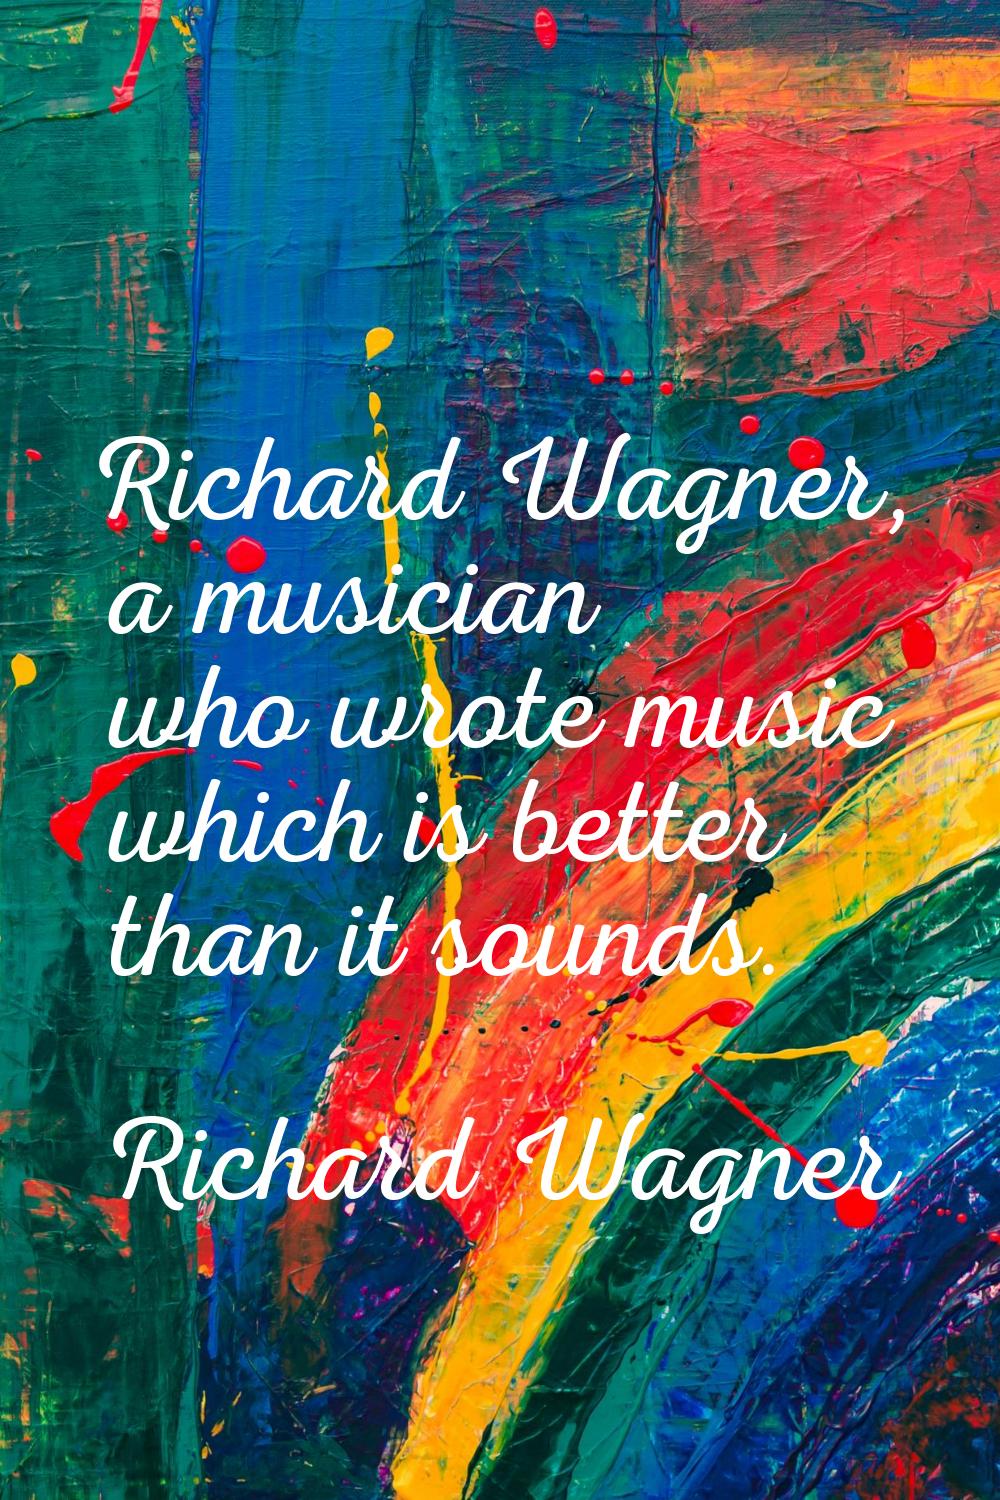 Richard Wagner, a musician who wrote music which is better than it sounds.